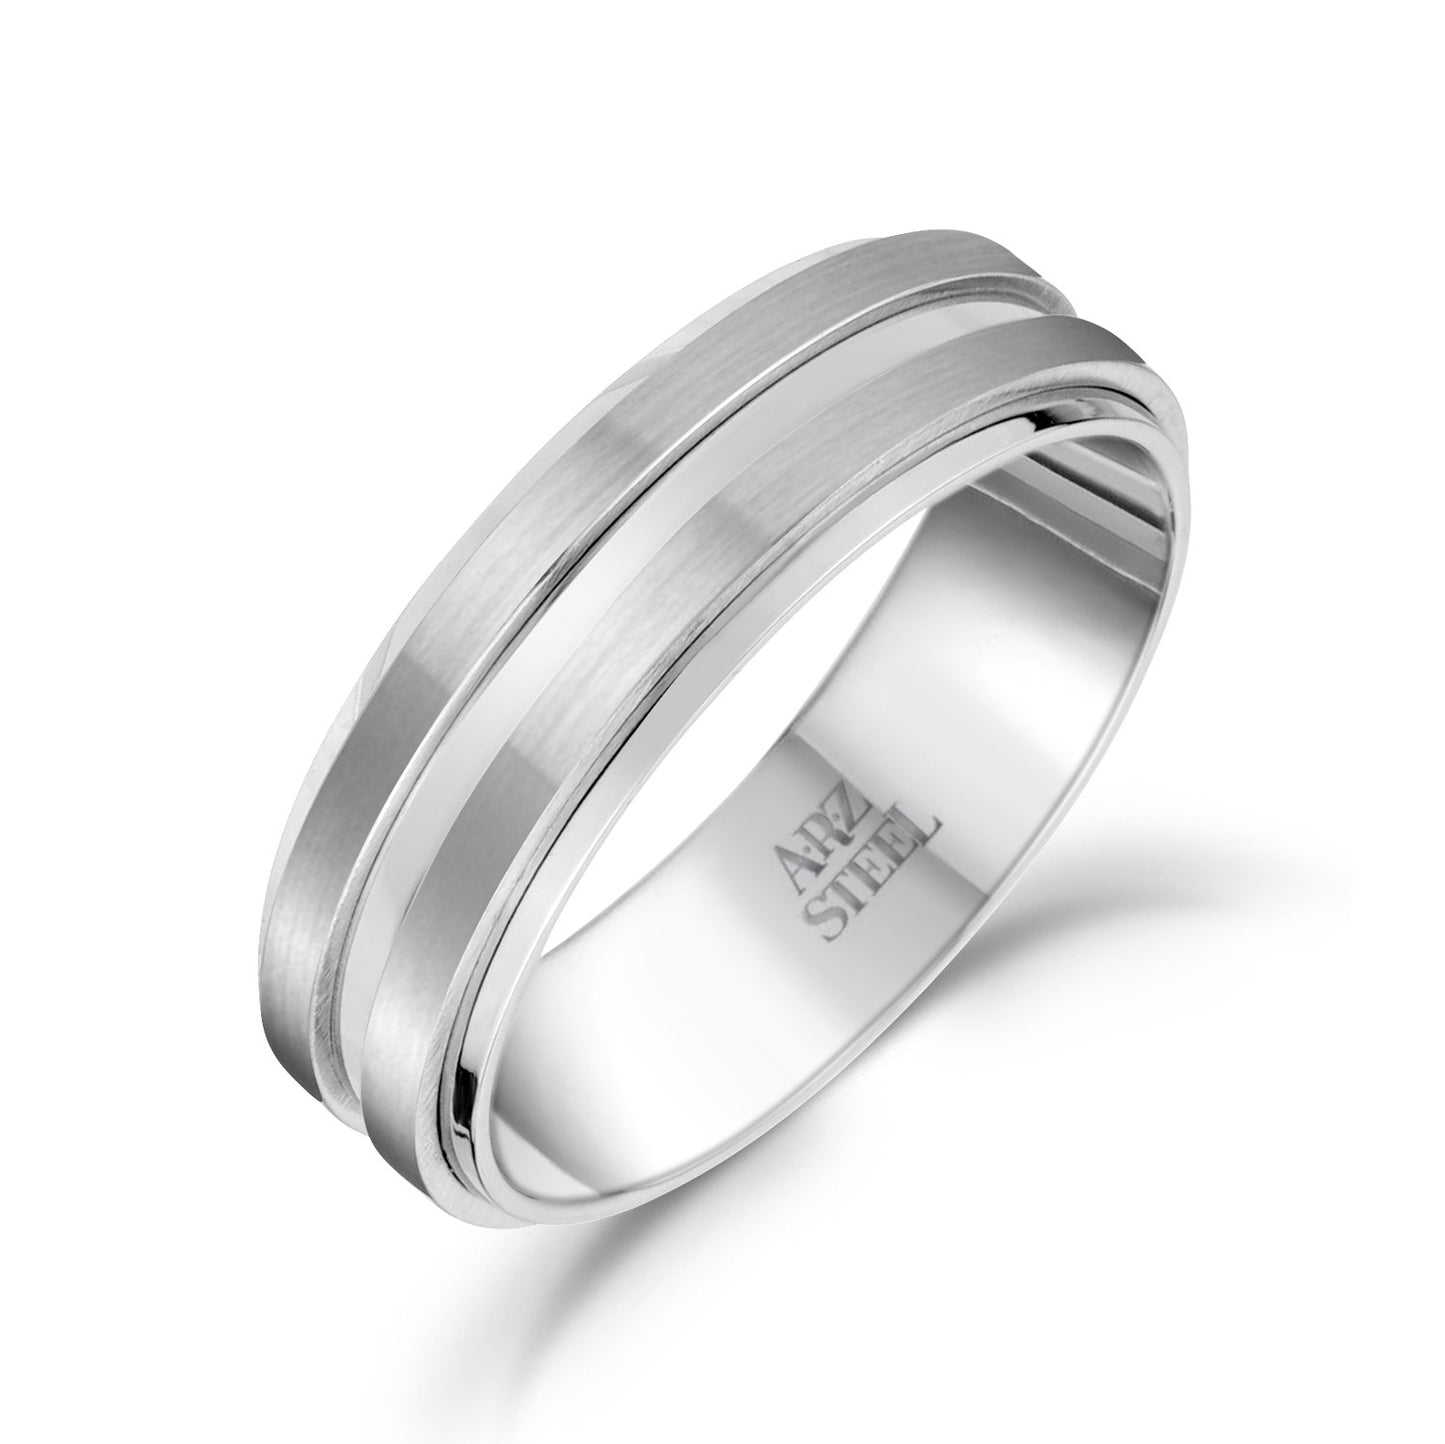 Stainless-Steel Double Striped Wedding Band Ring | ARZ Steel | Luby 